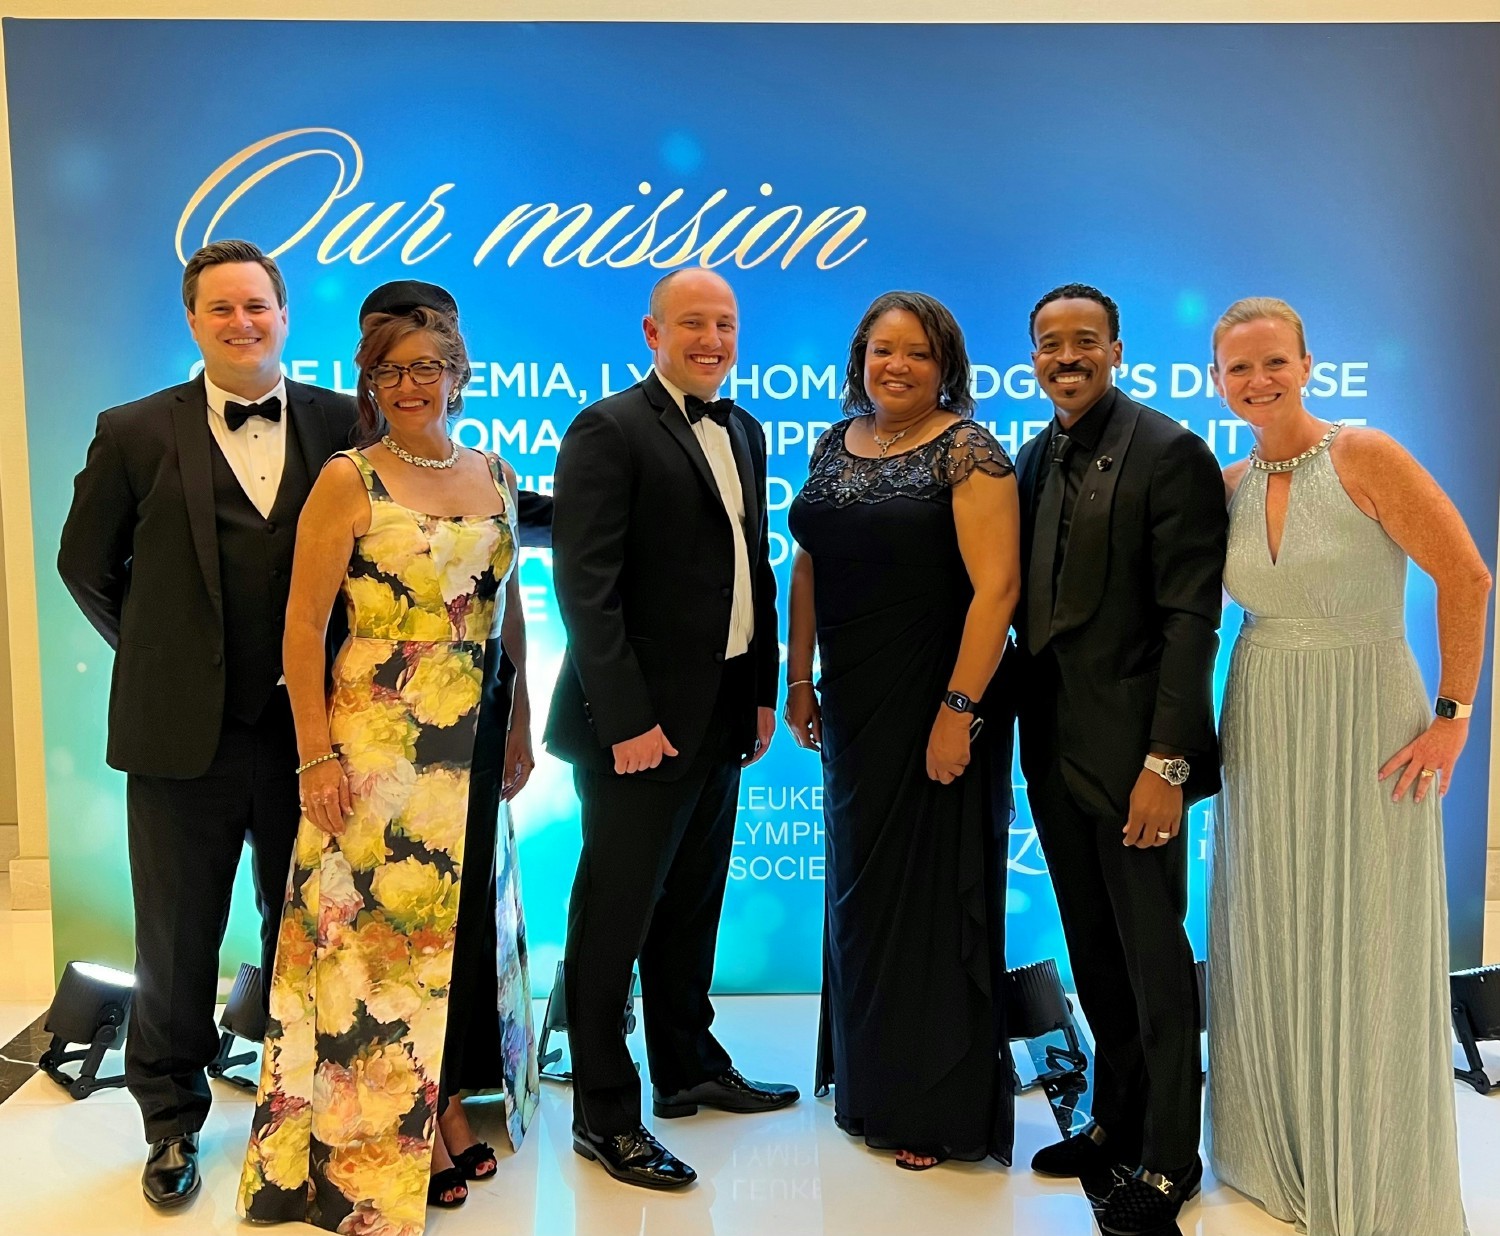 DLH leaders dressed fancy to support the Leukemia and Lymphoma Society's research efforts at a Black-Tie event.